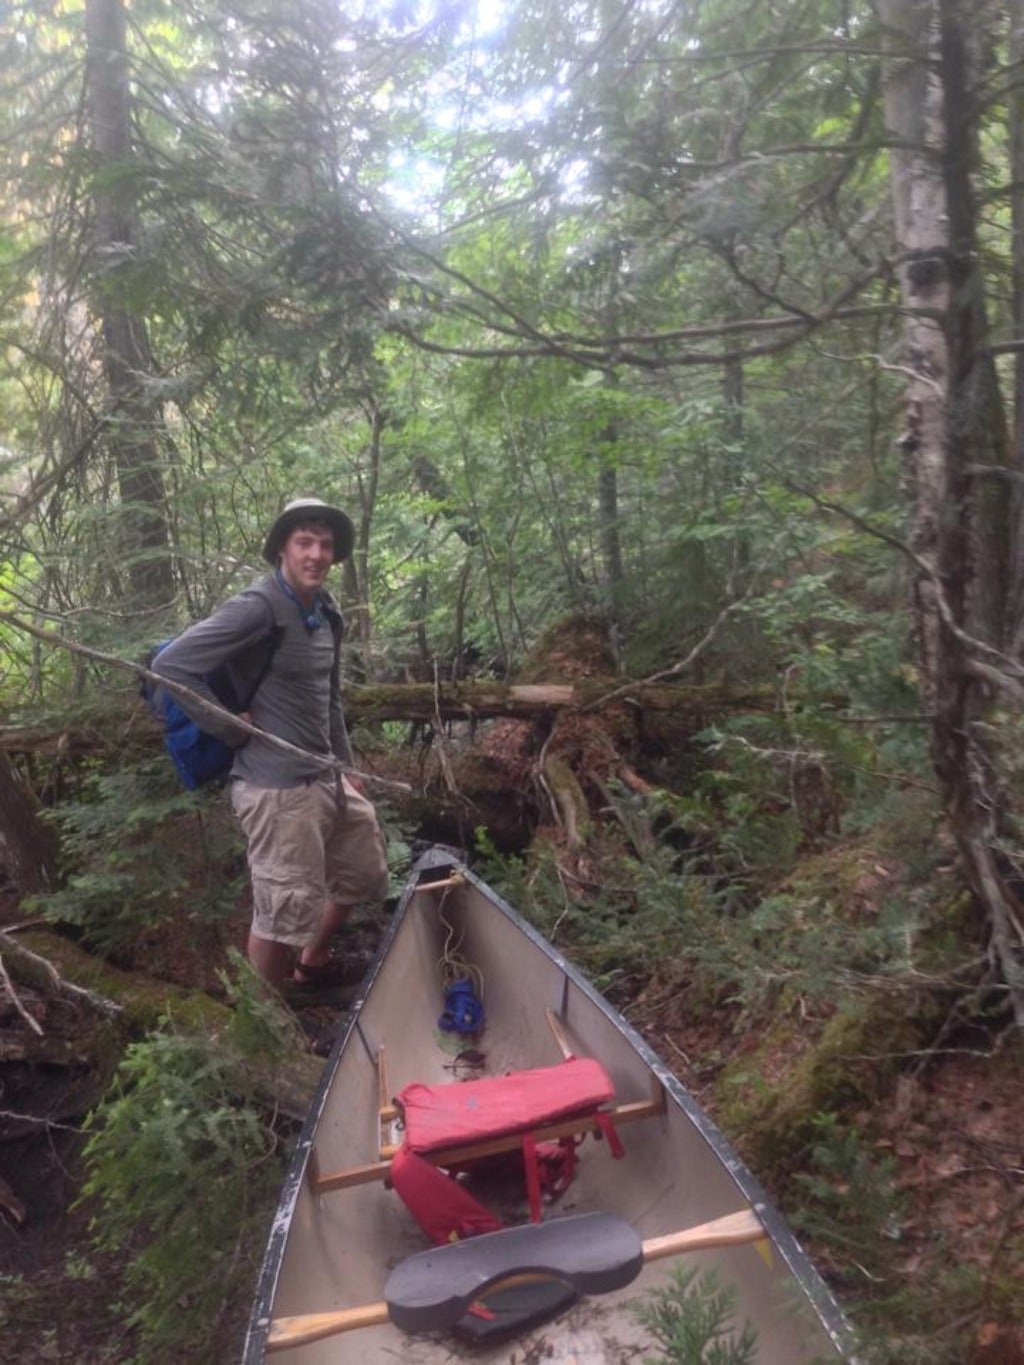 Stephen adventuring through the woods with his canoe